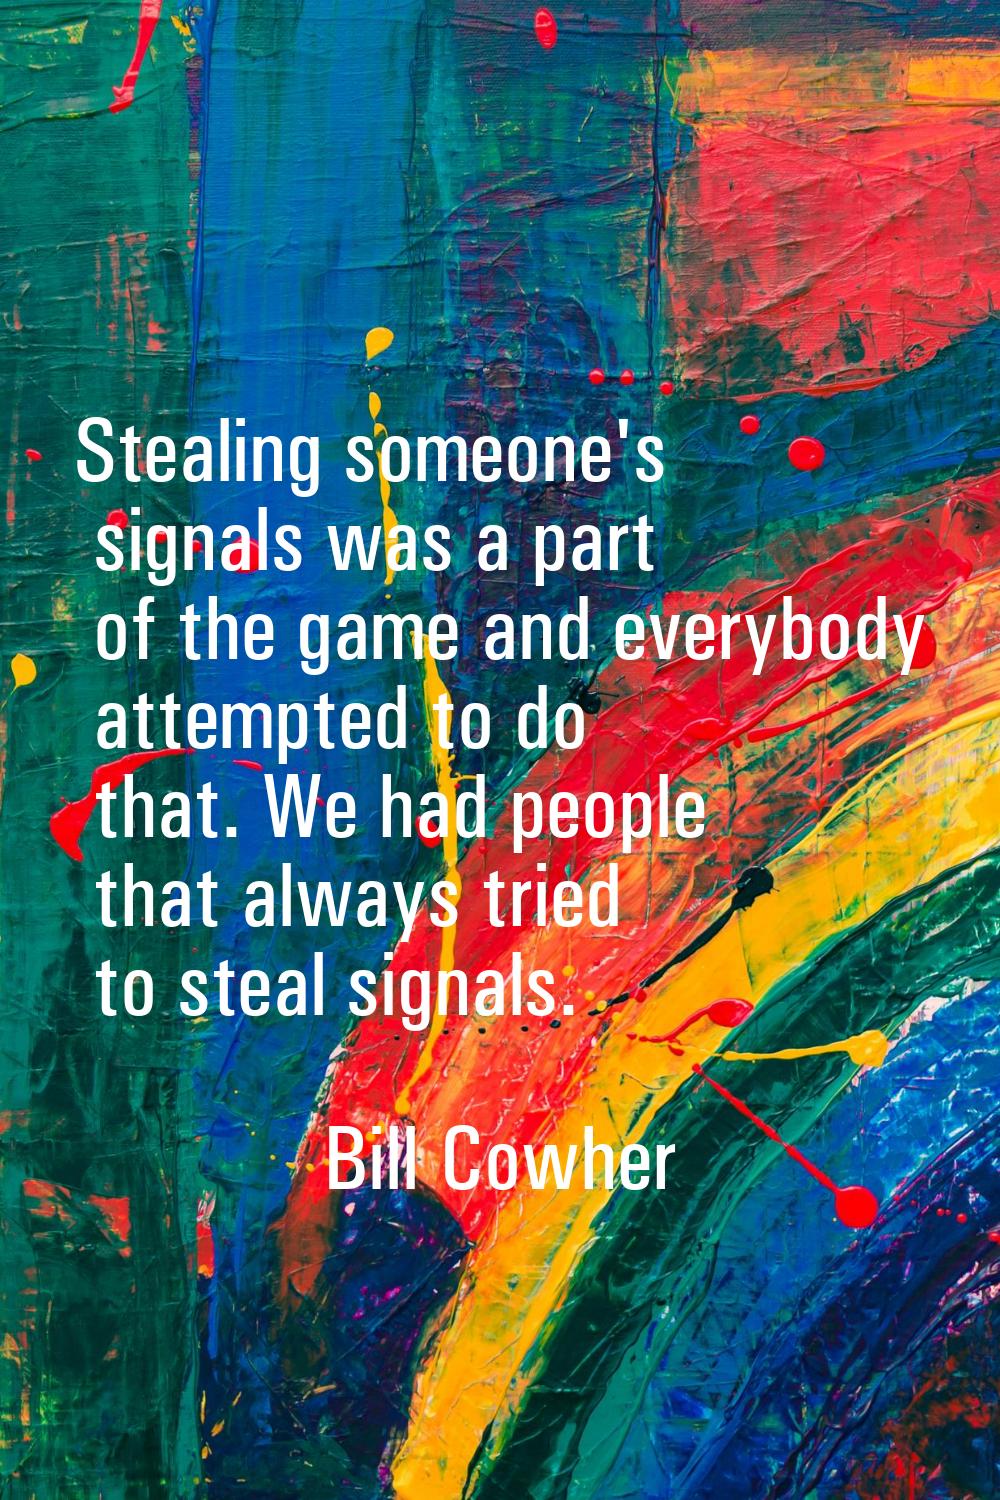 Stealing someone's signals was a part of the game and everybody attempted to do that. We had people